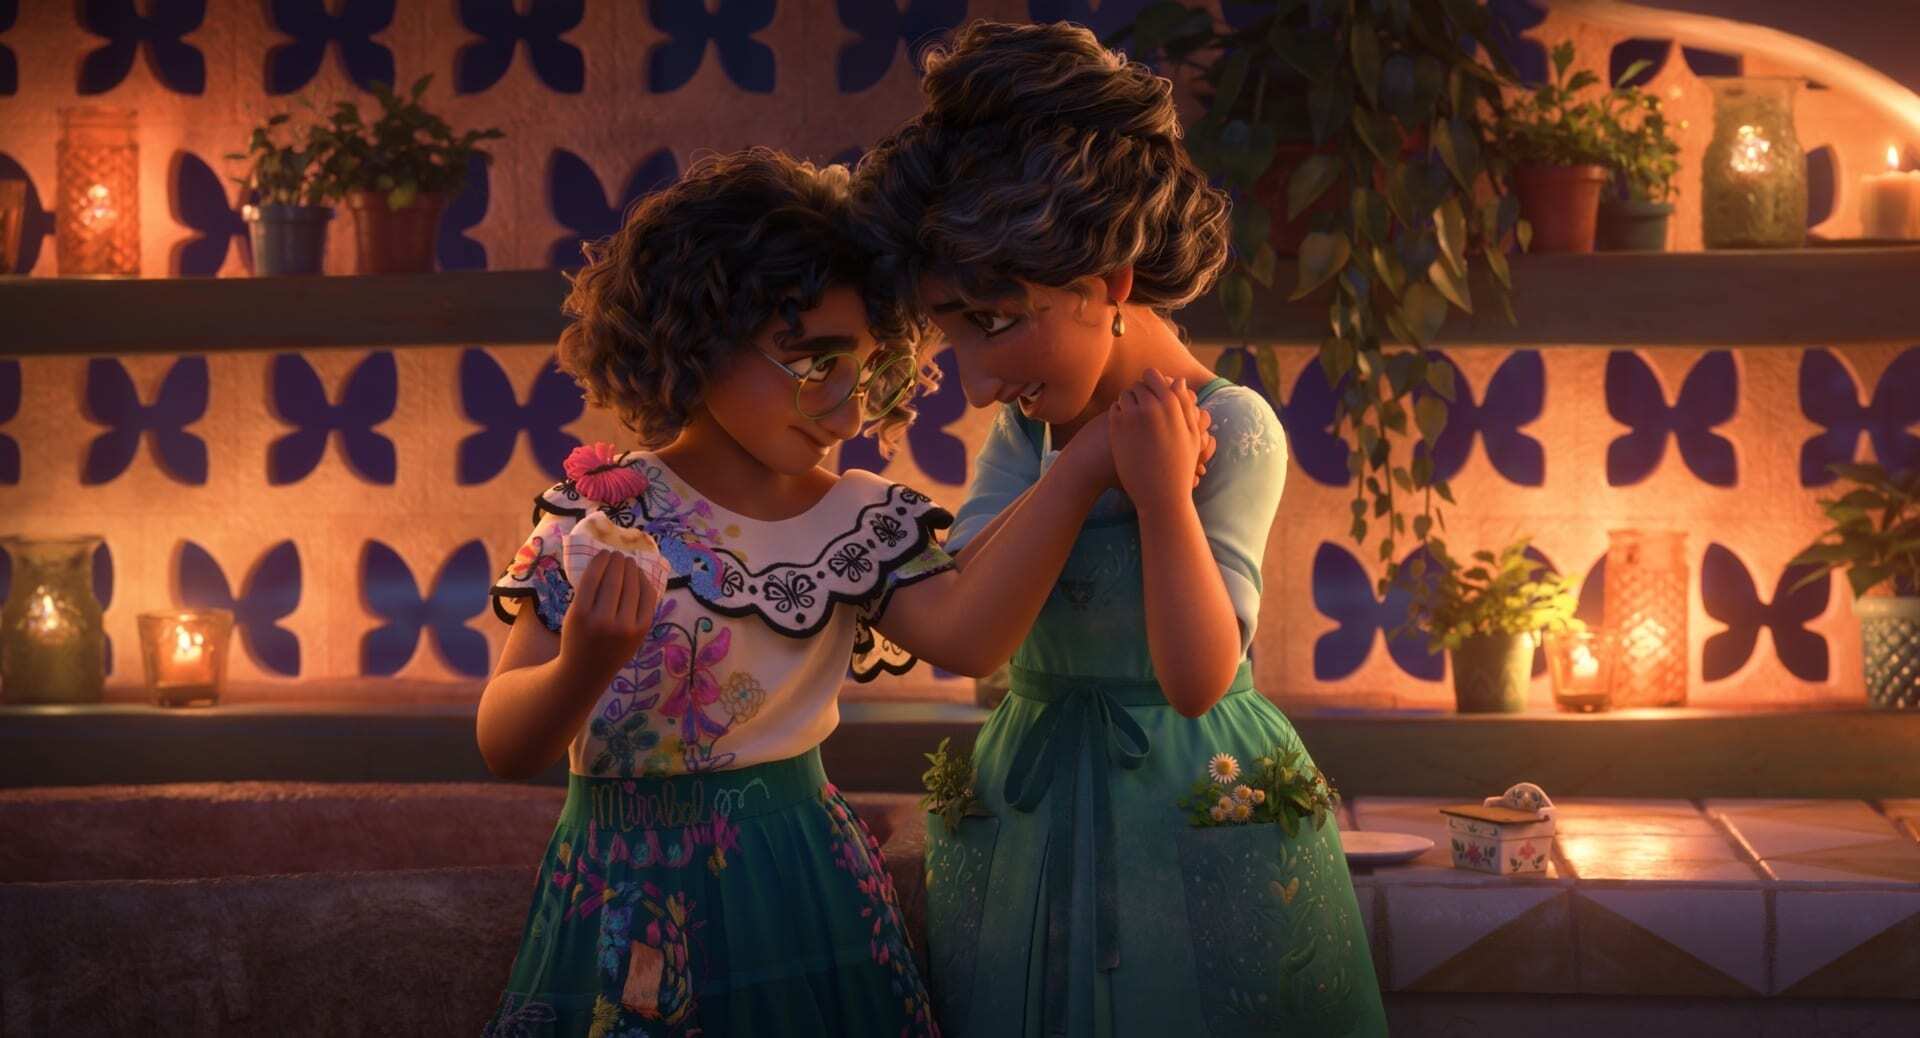 How 'Encanto' fits into Disney's mission of promoting inclusion